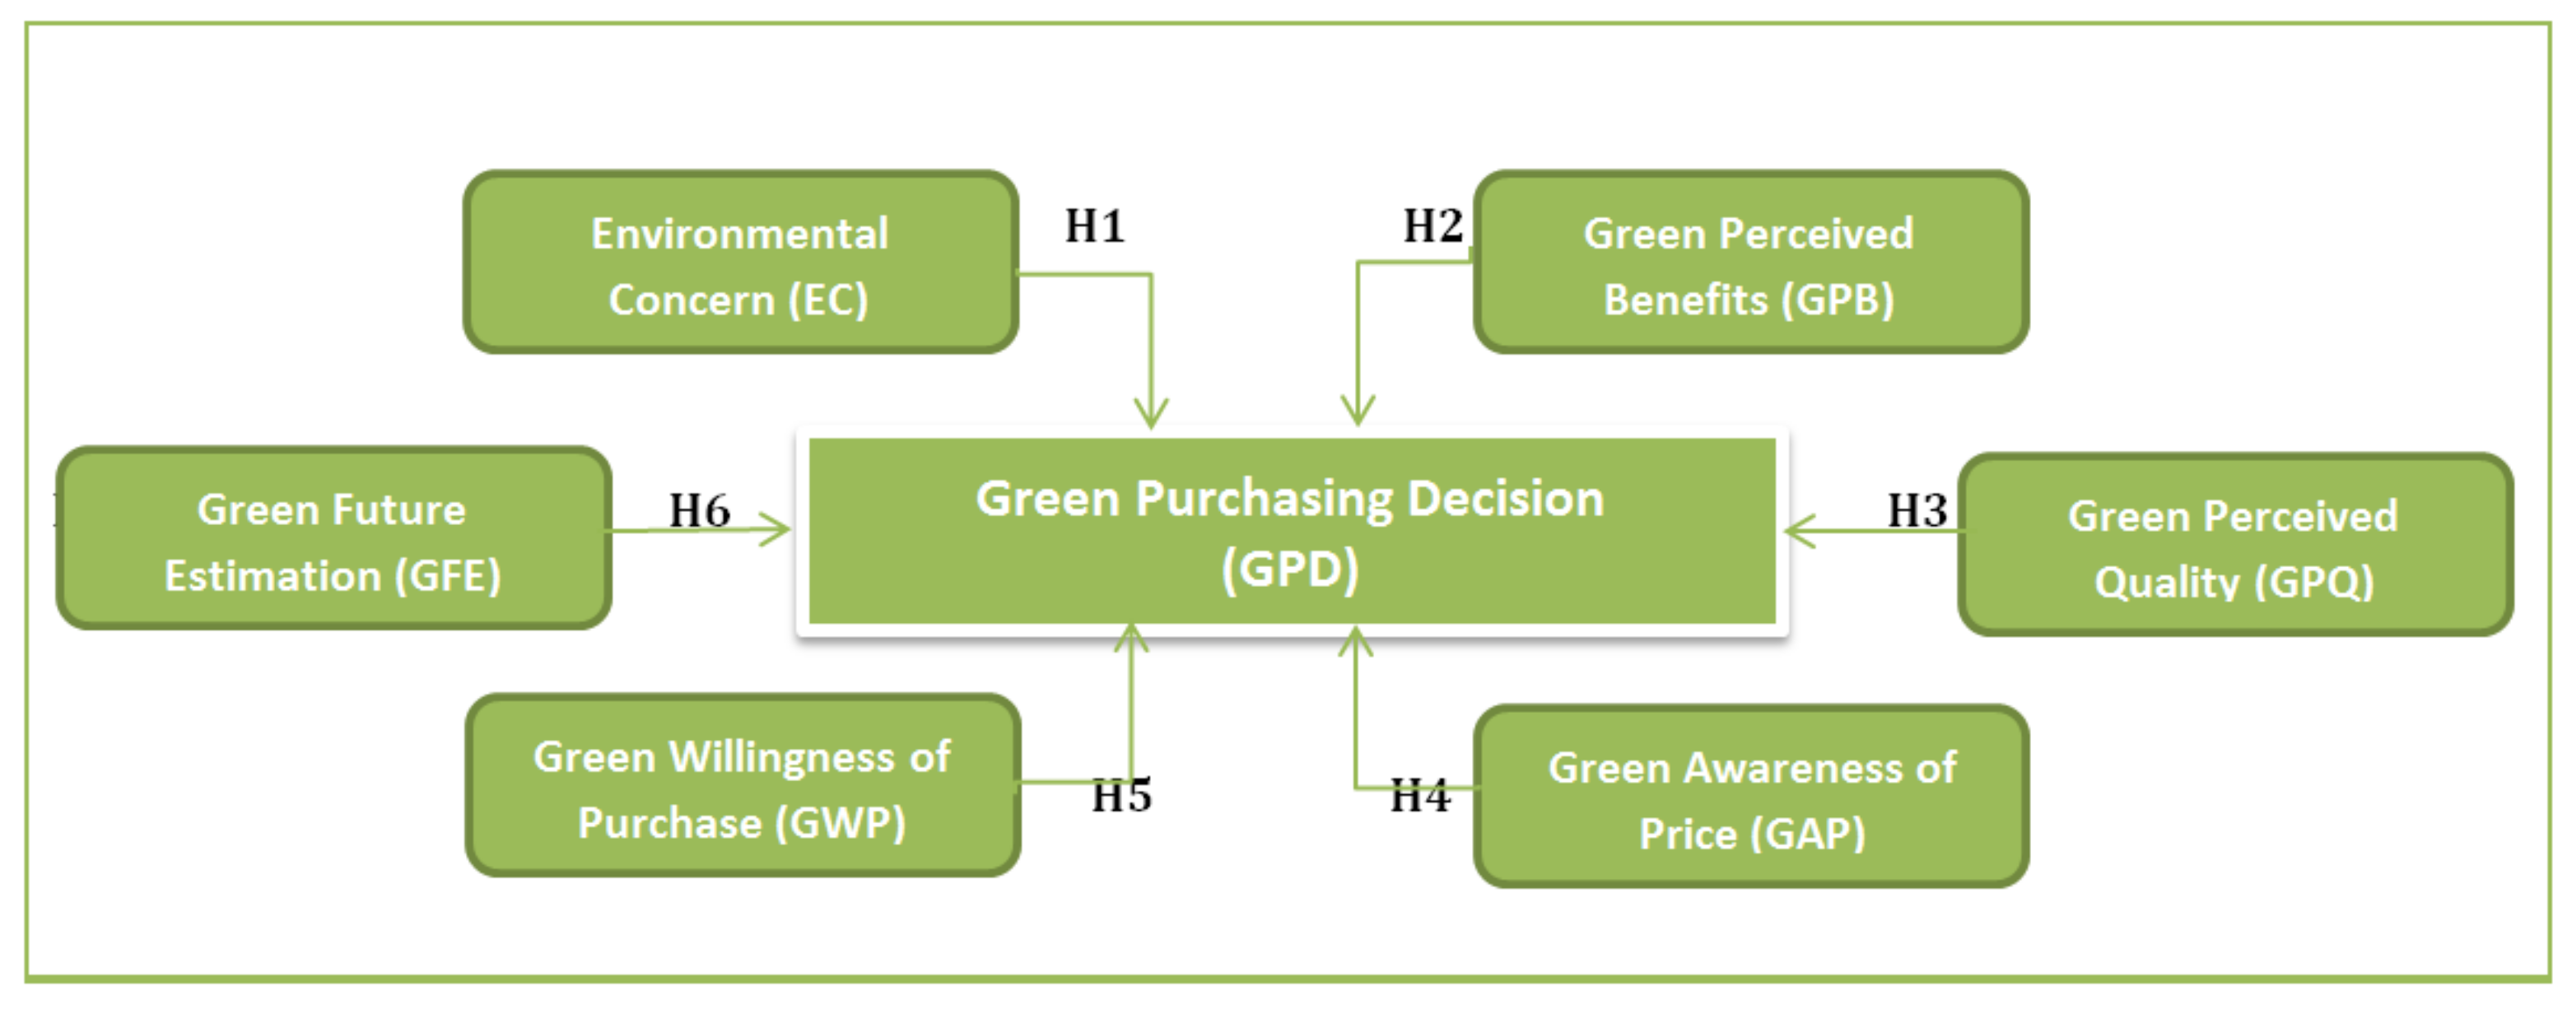 One Green Score to Rule Them All: The Next Phase of Green Marketing?